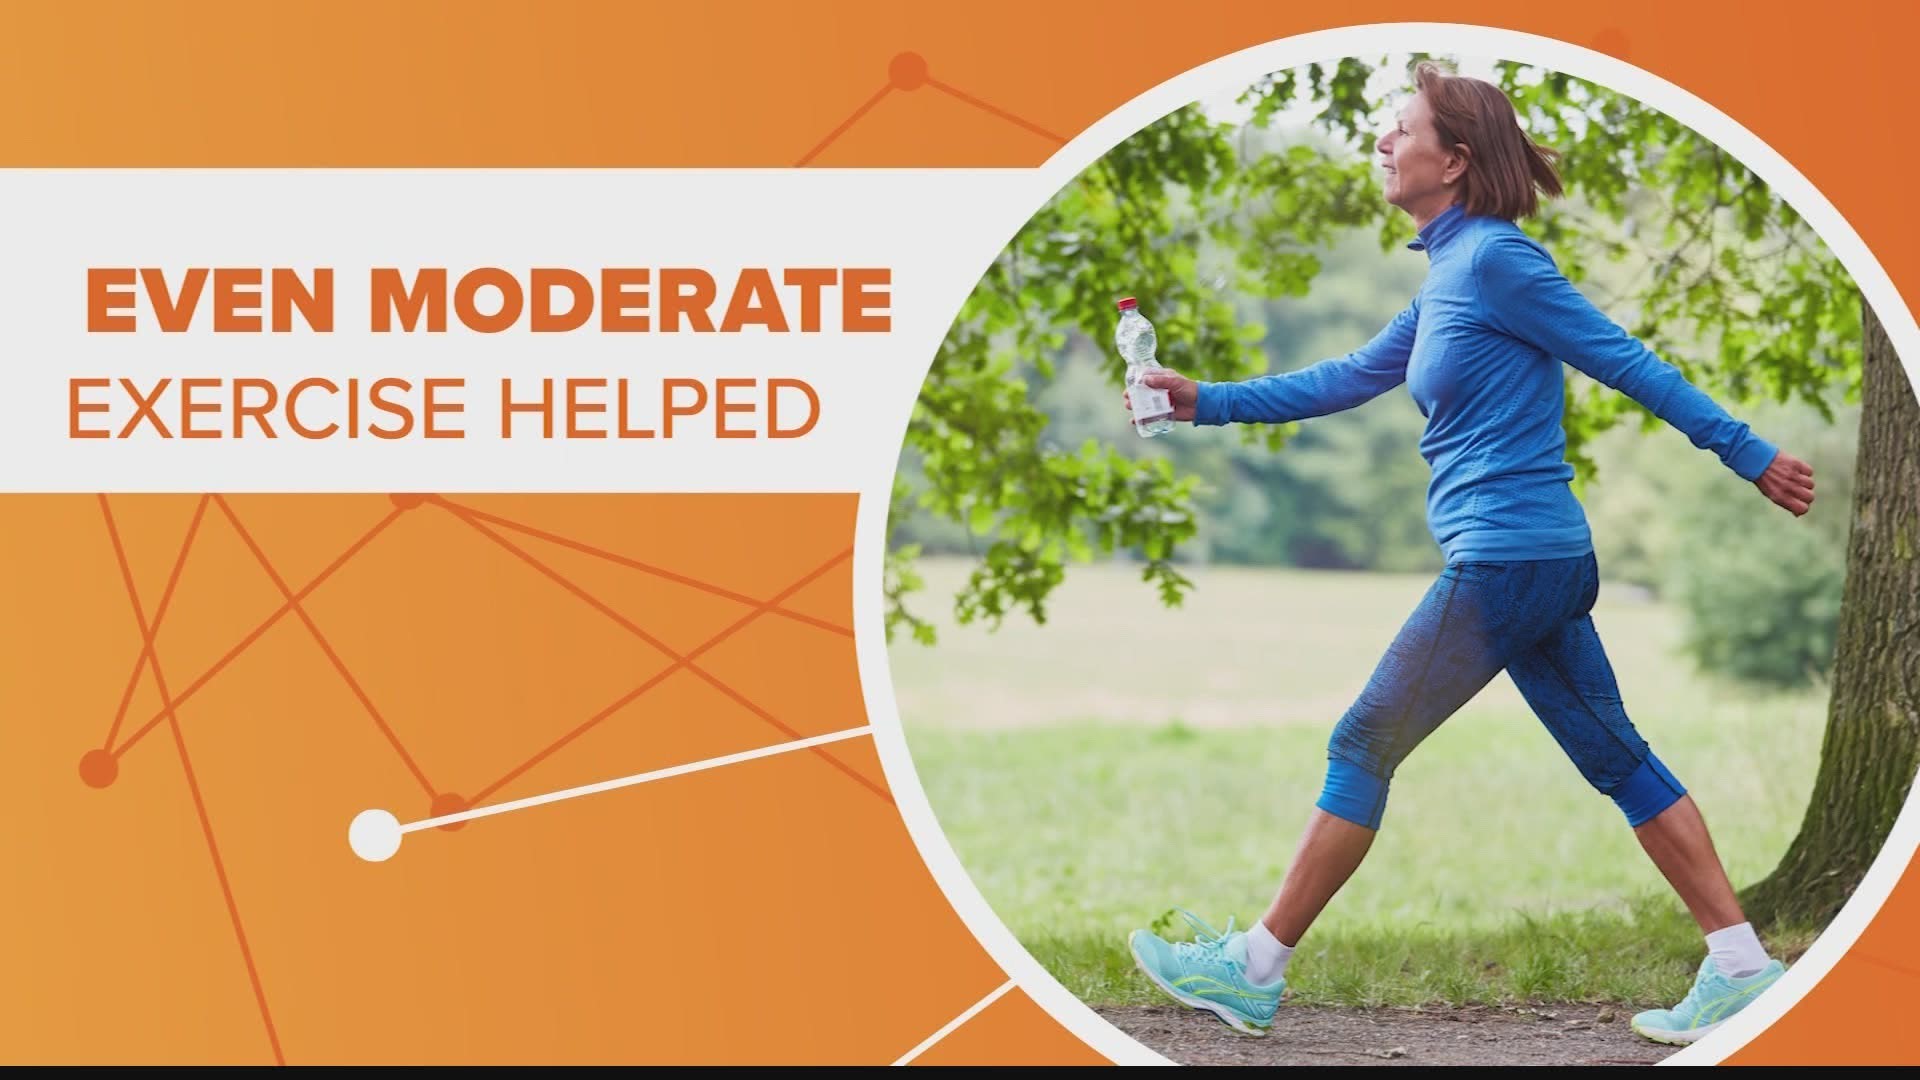 Researchers say that even moderate exercise can help patient recovery.